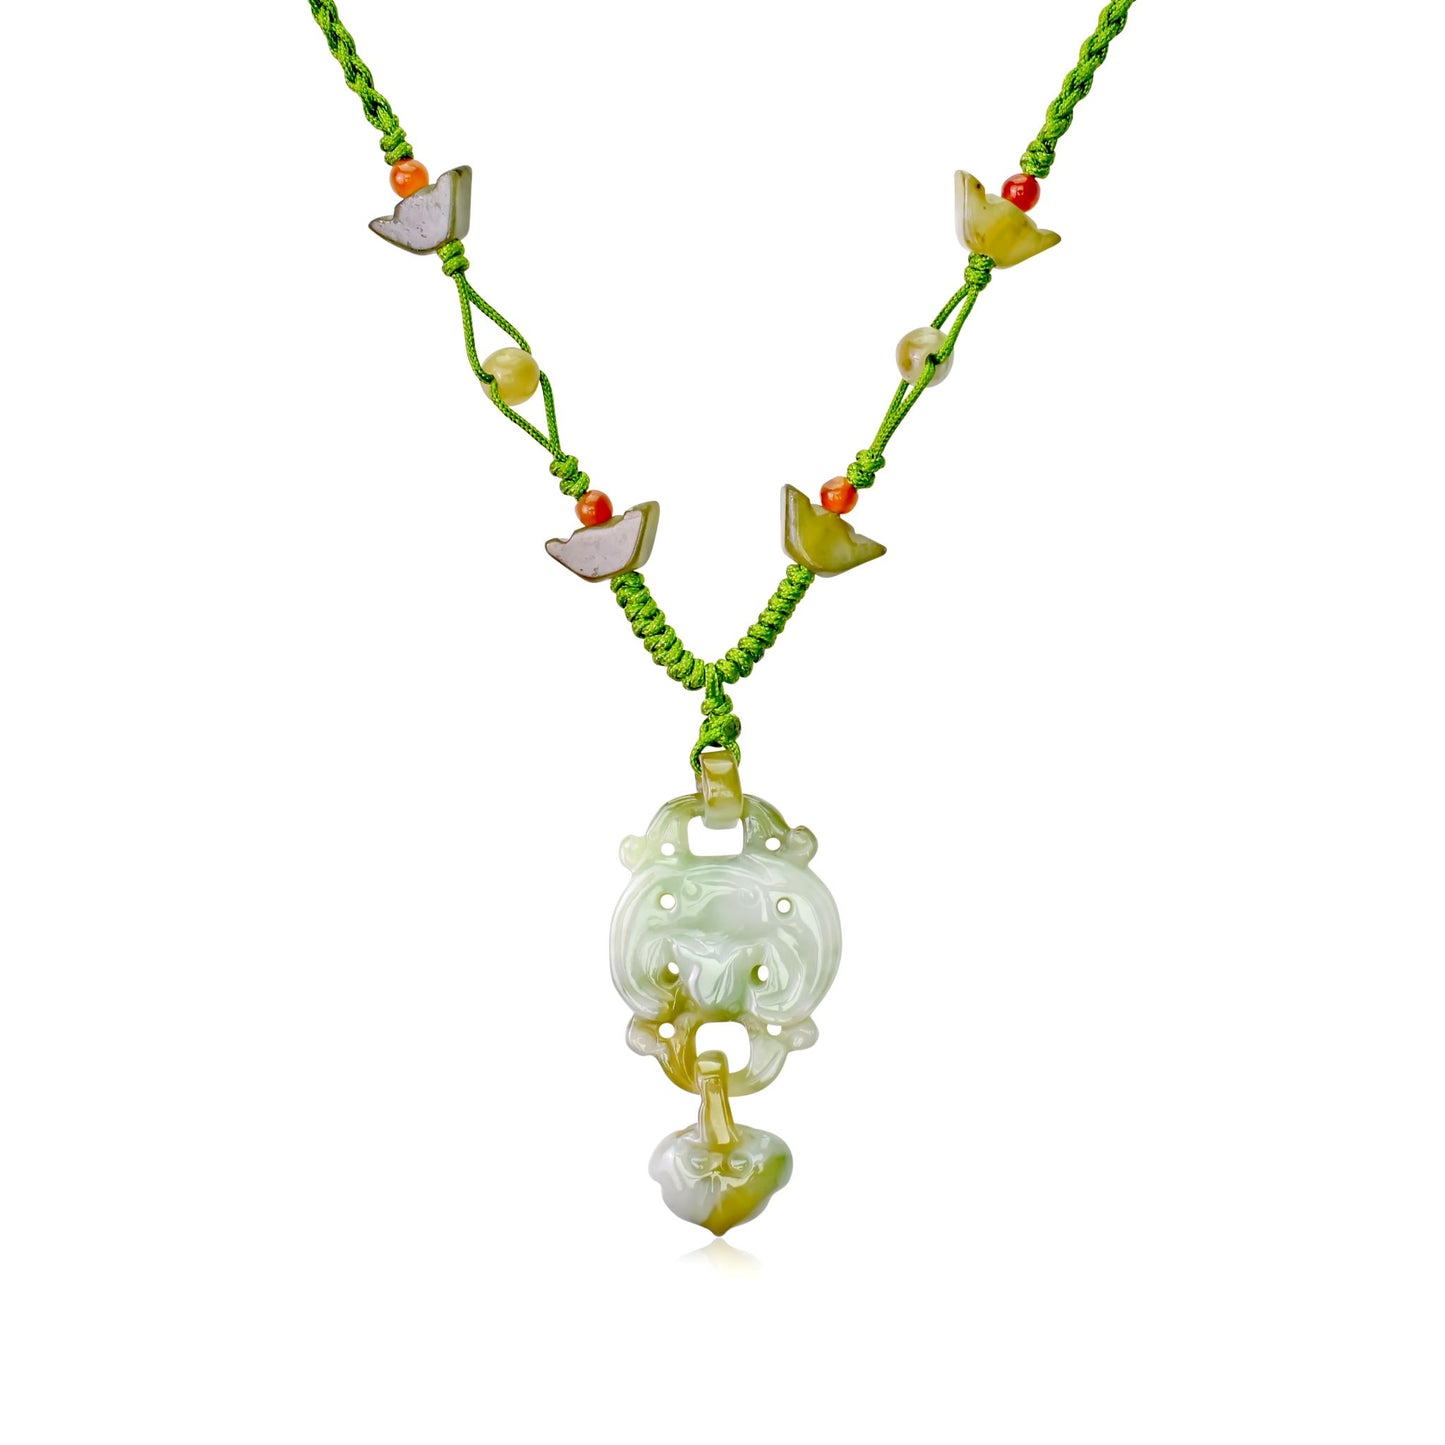 Elevate your Luck with Bat and Heart Handmade Jade Necklace Pendant made with Lime Cord